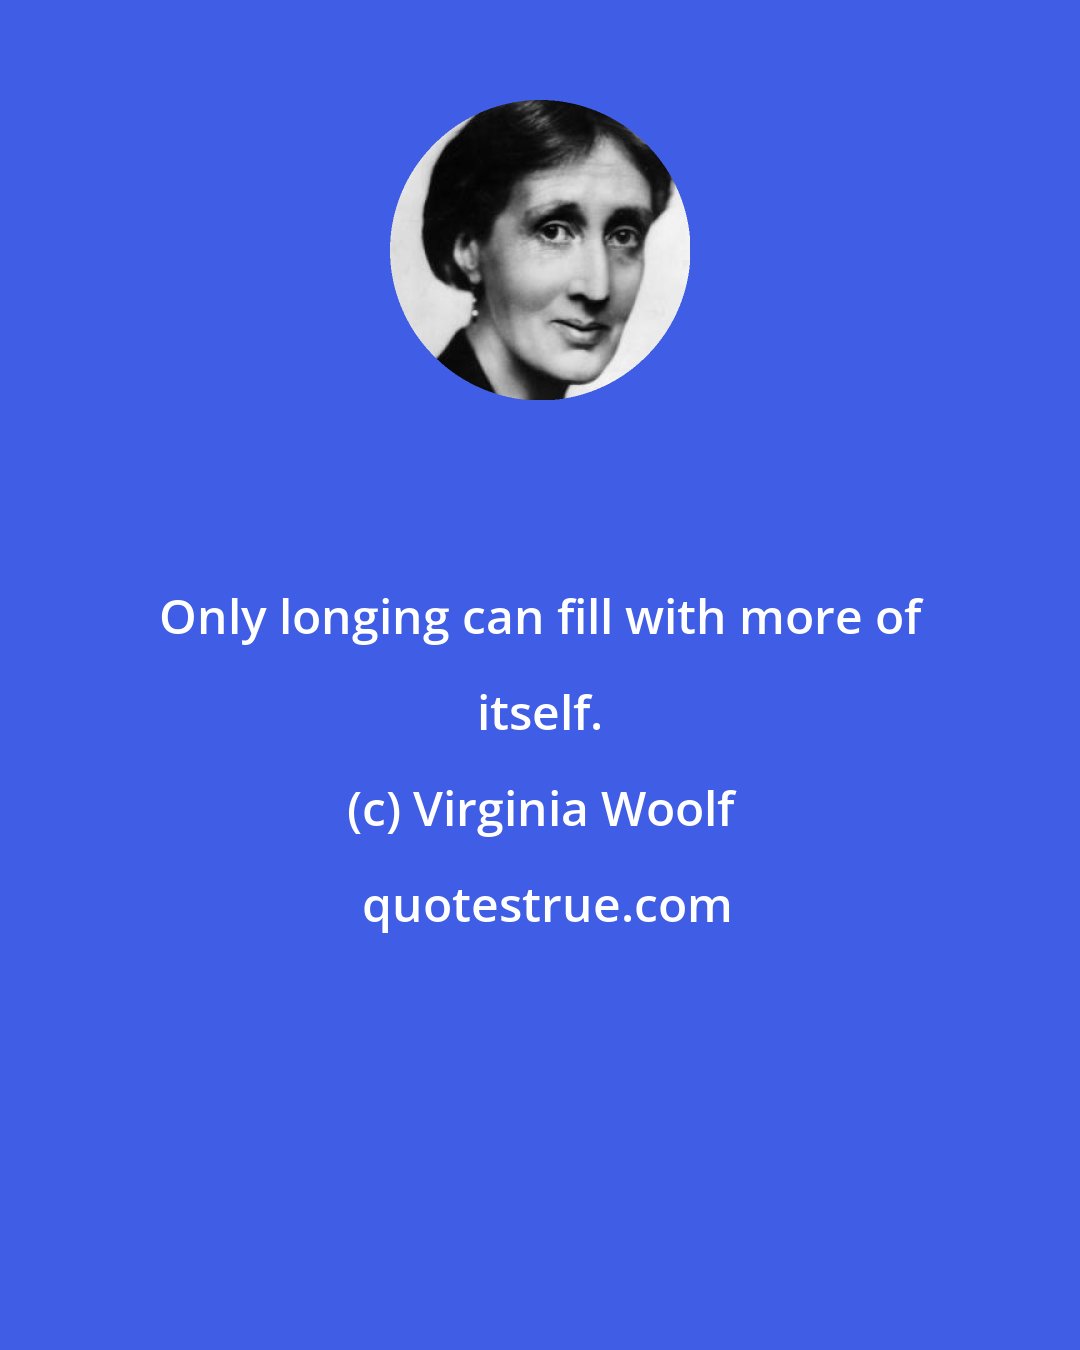 Virginia Woolf: Only longing can fill with more of itself.